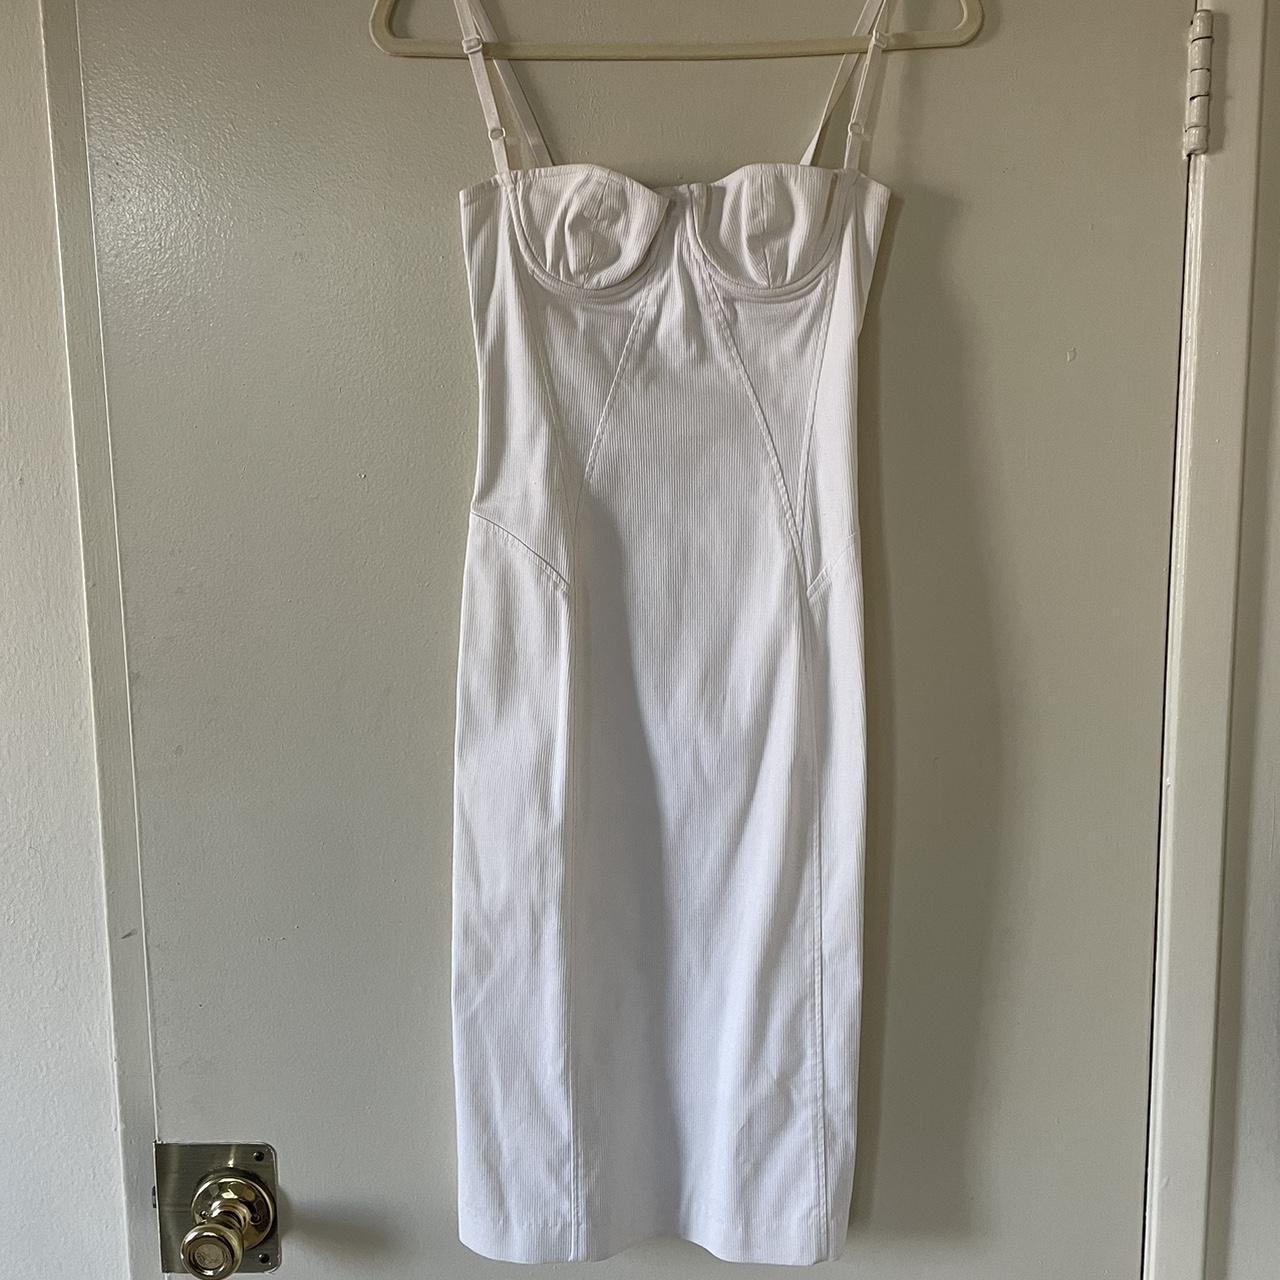 item listed by oldgregclothing